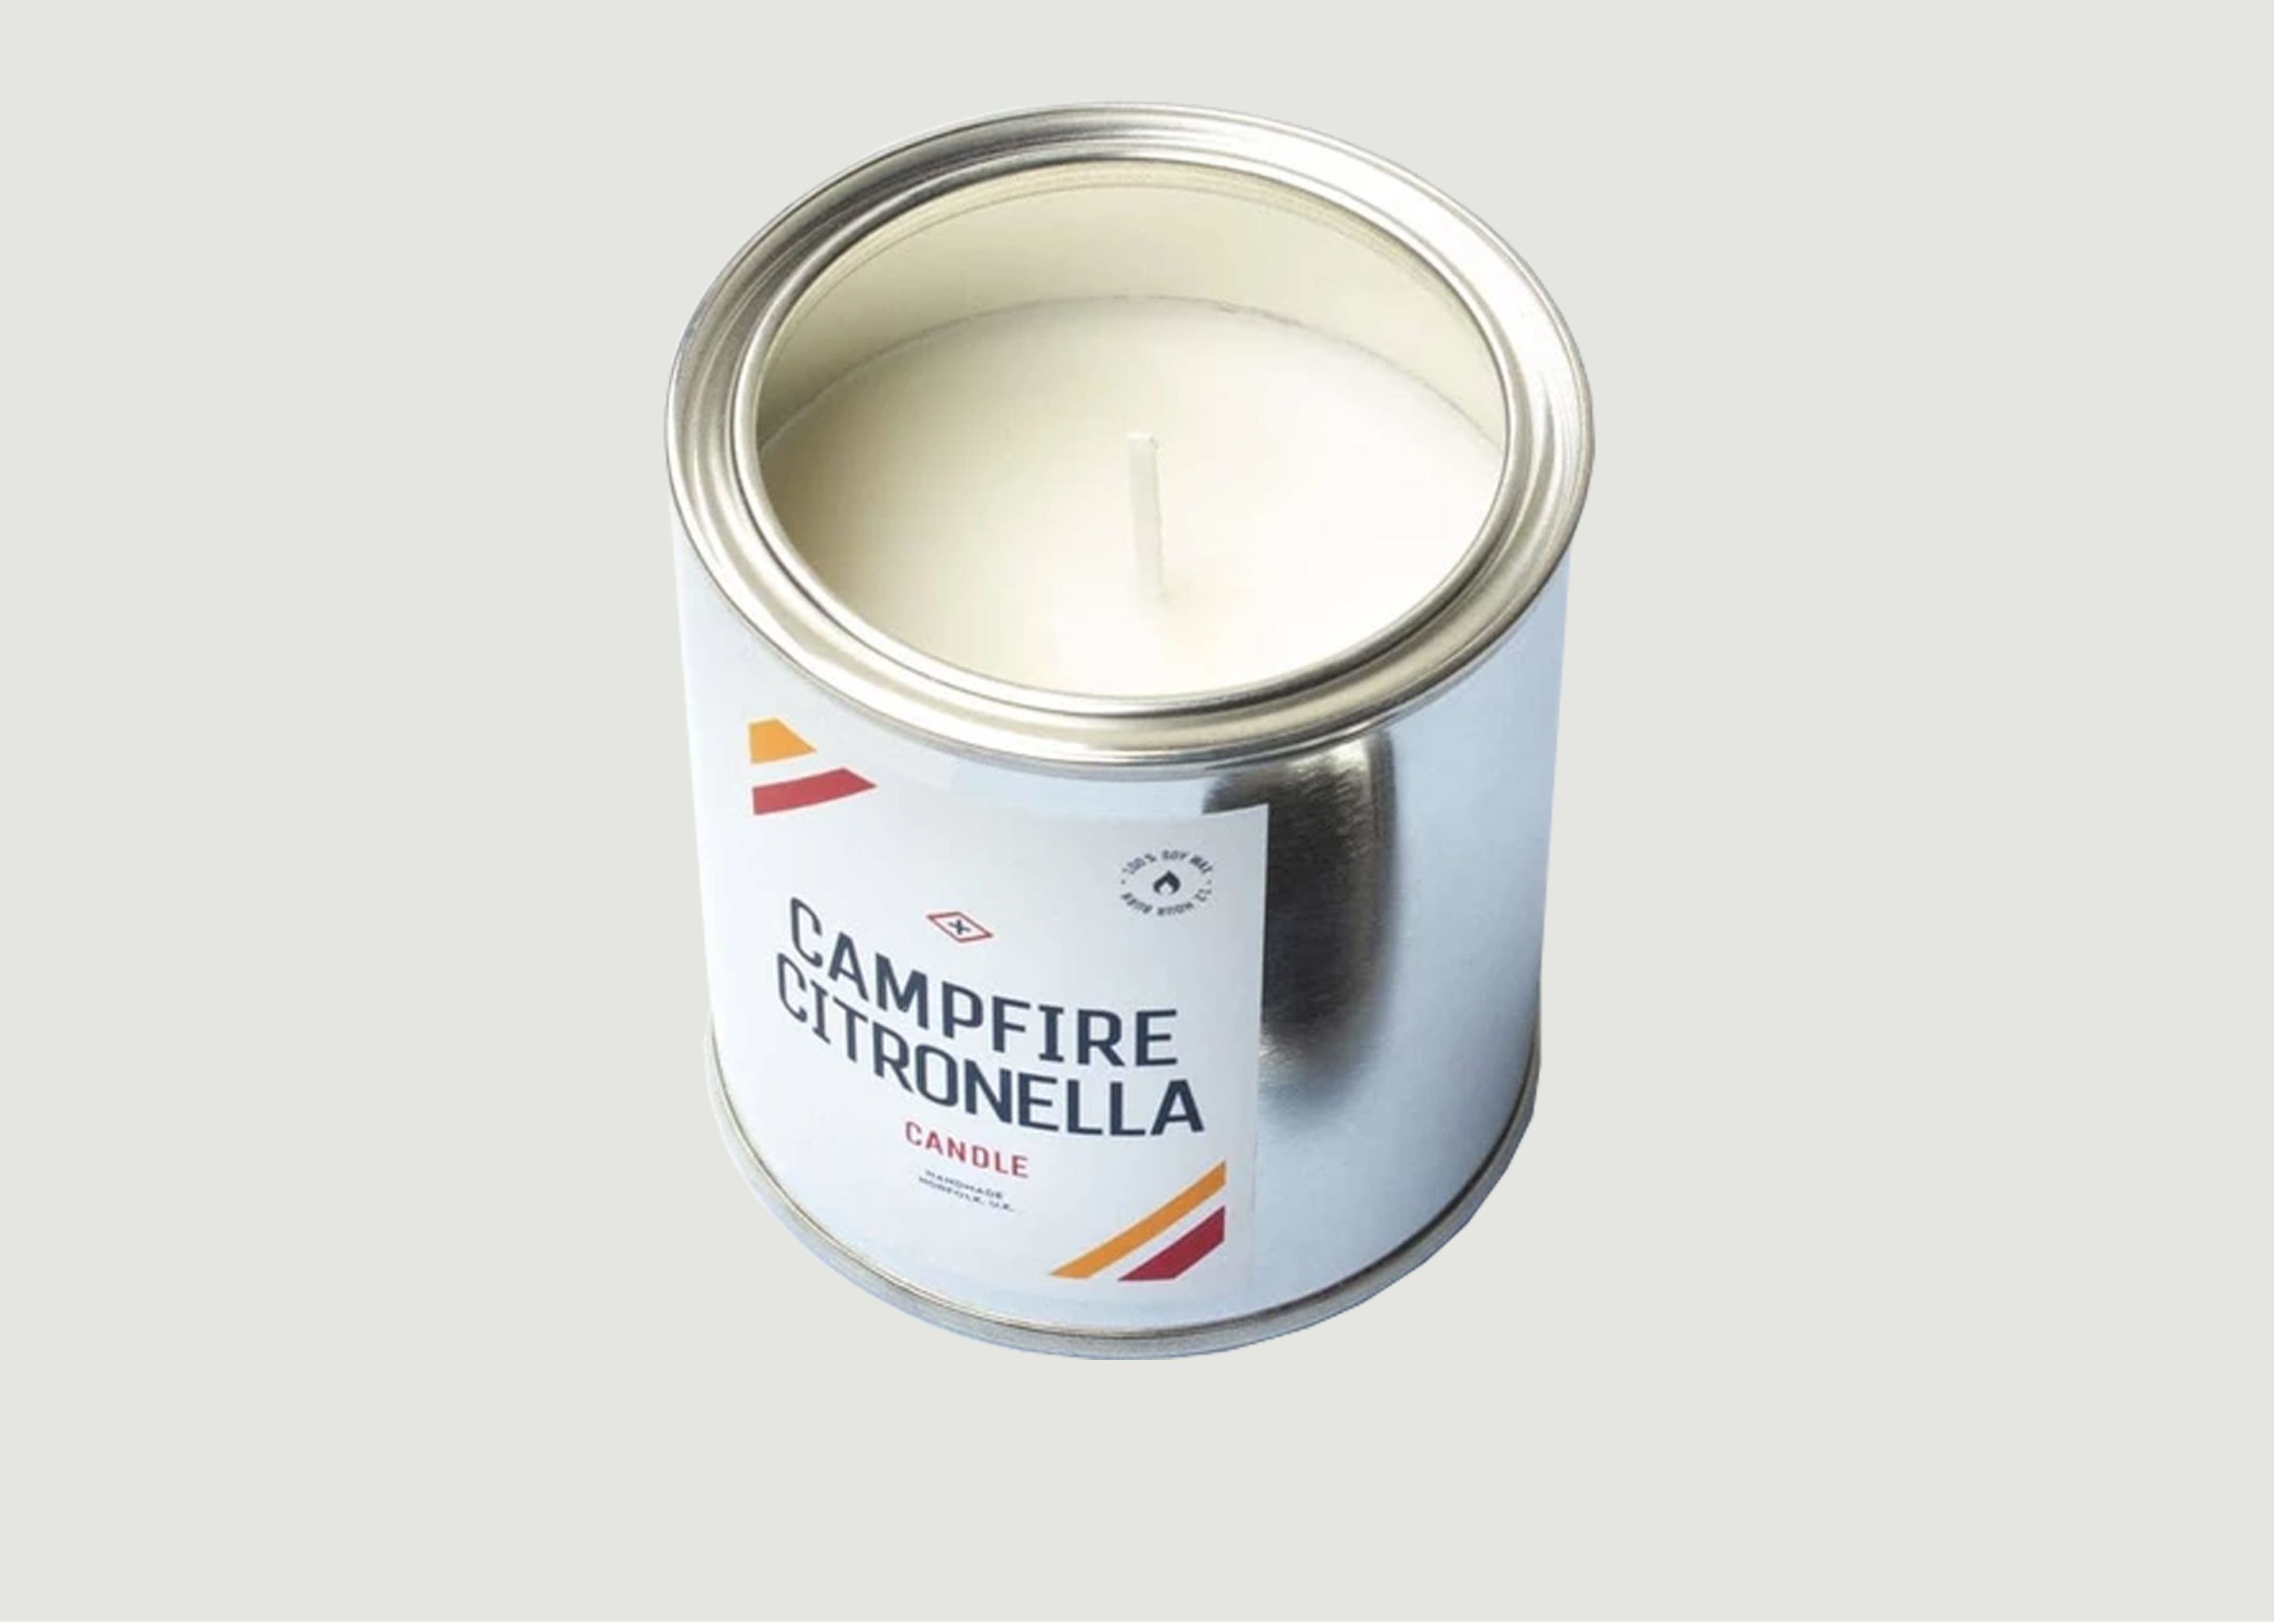 Paint Tin Candle - Citronella - Men's Society